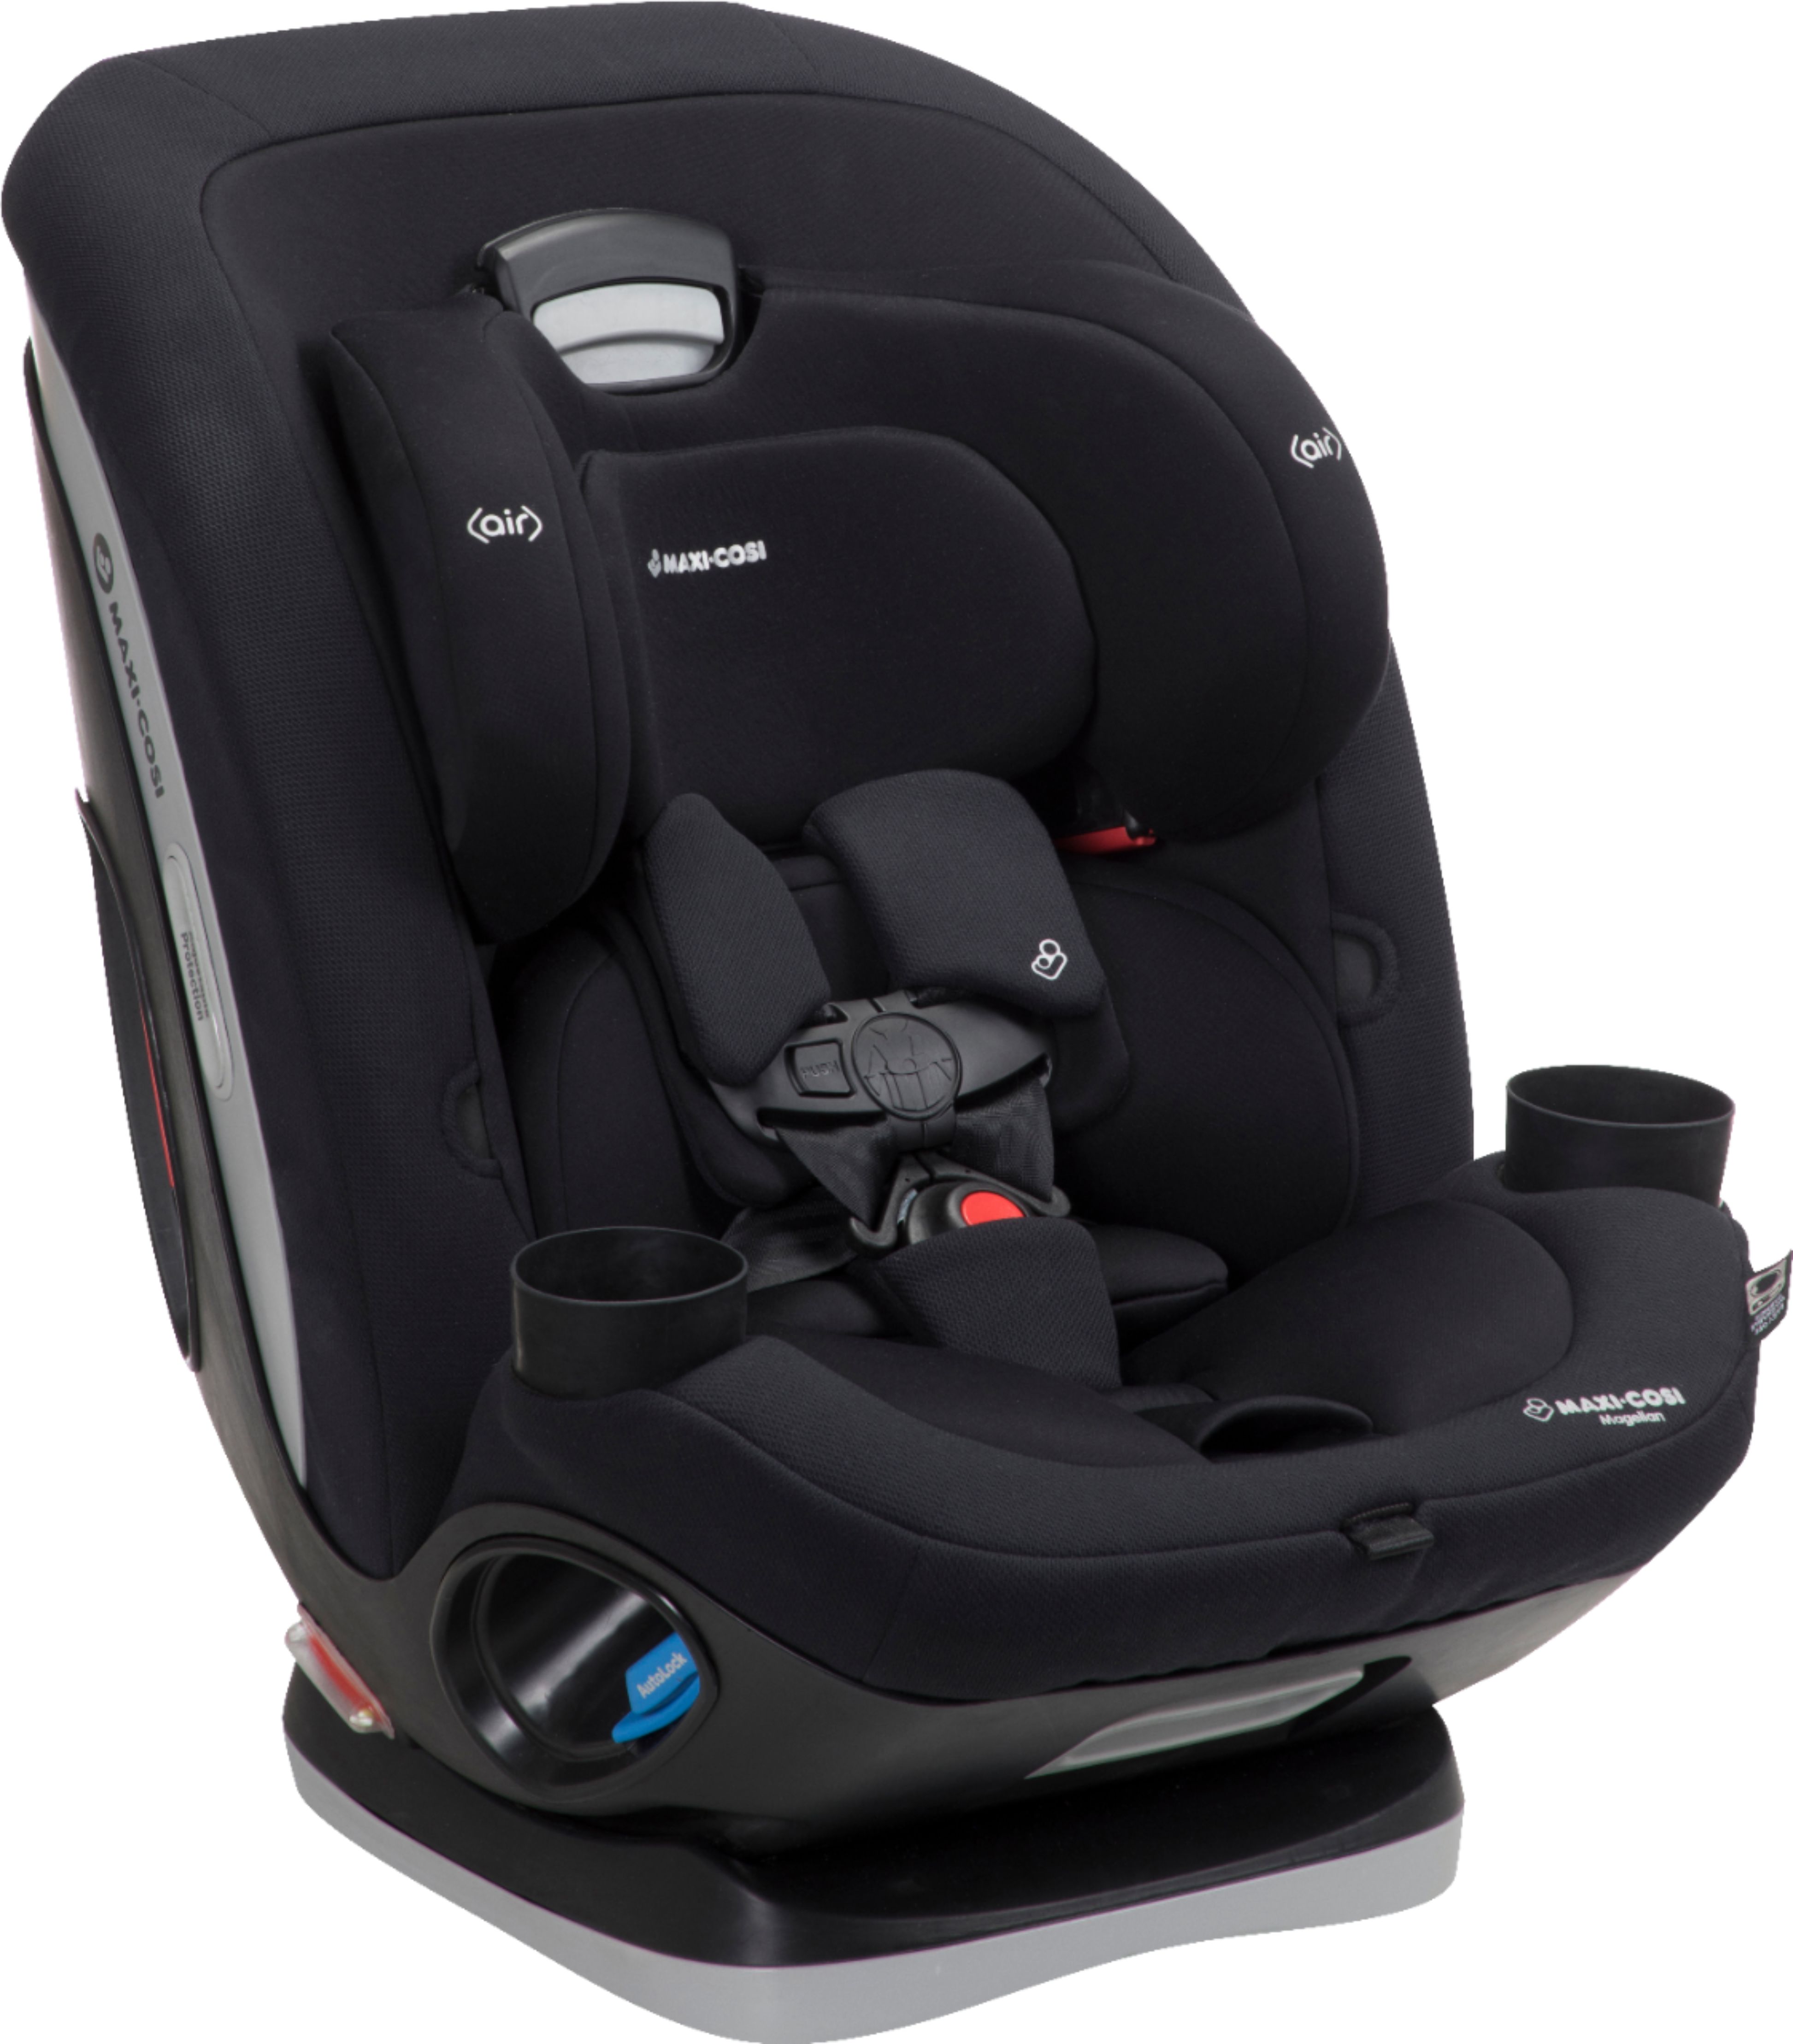 Angle View: Maxi-Cosi Magellan All-in-One Convertible Car Seat with 5 modes, Night Black